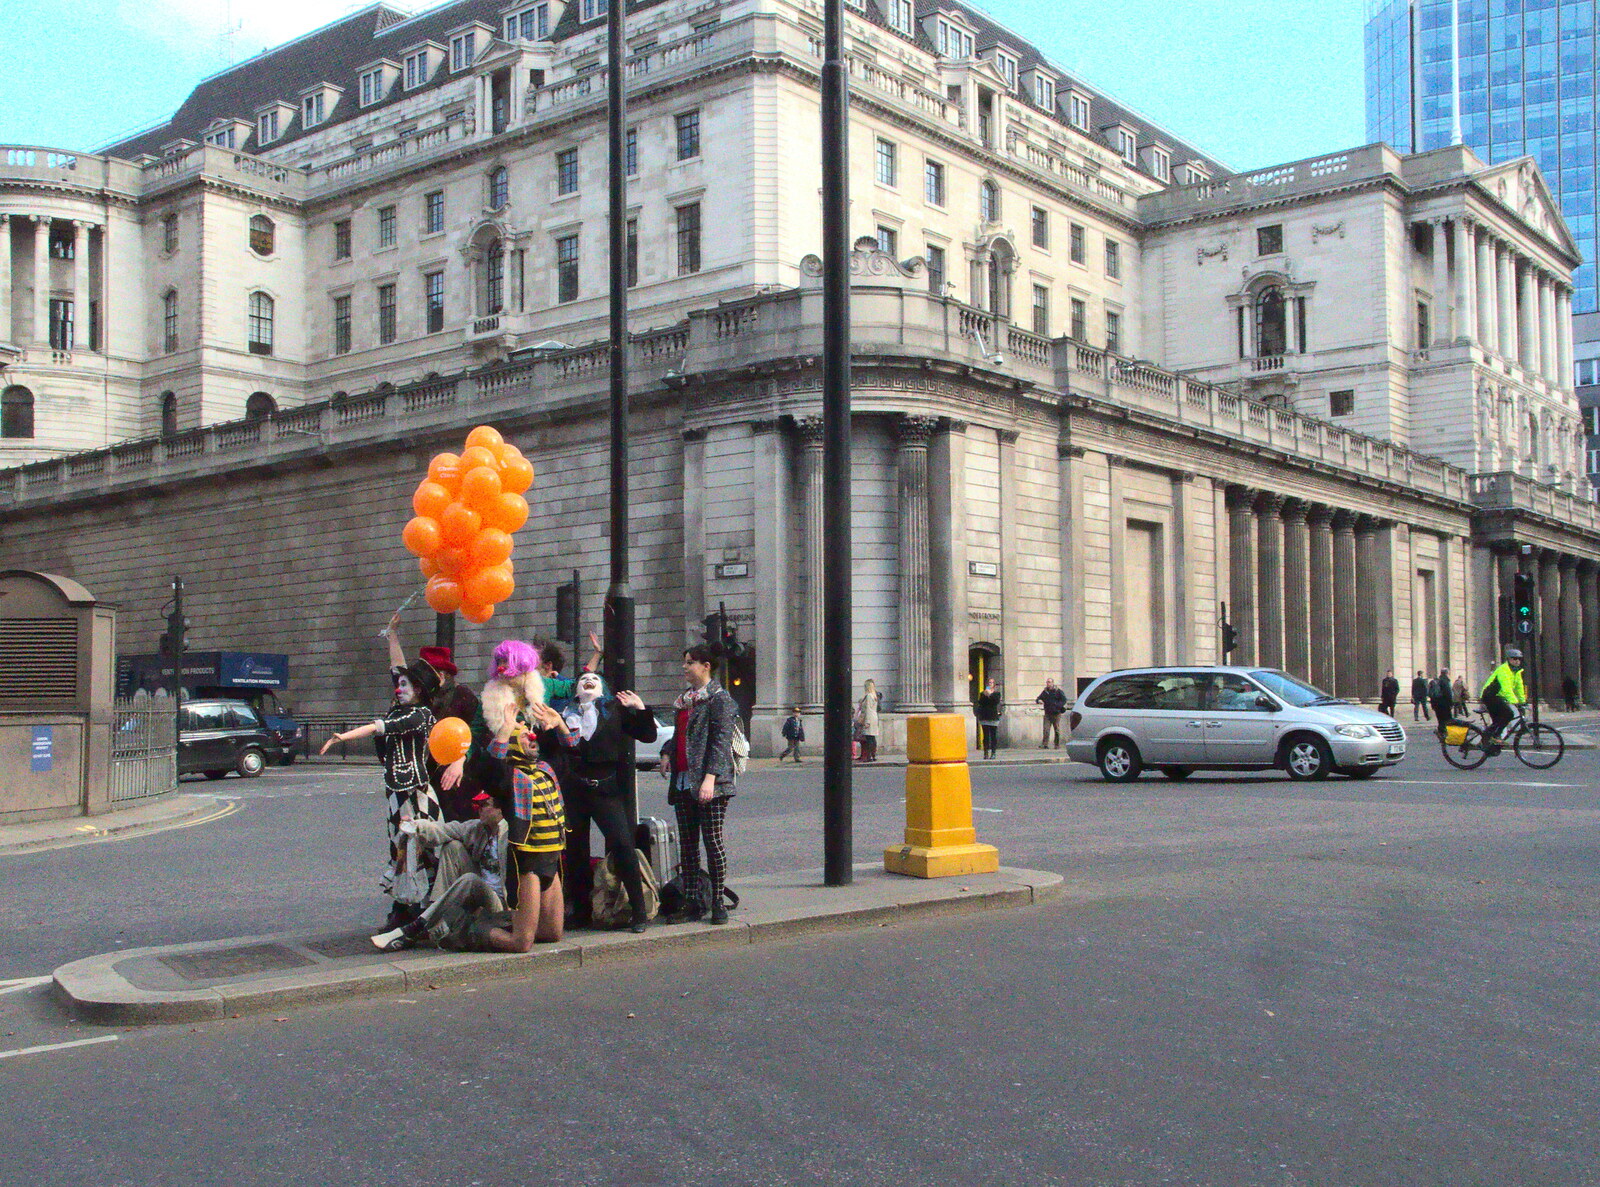 The circus group perform outside the Bank of England from The Last Day of Pre-School and Beer at the Trowel and Hammer, Cotton, Suffolk - 29th March 2015